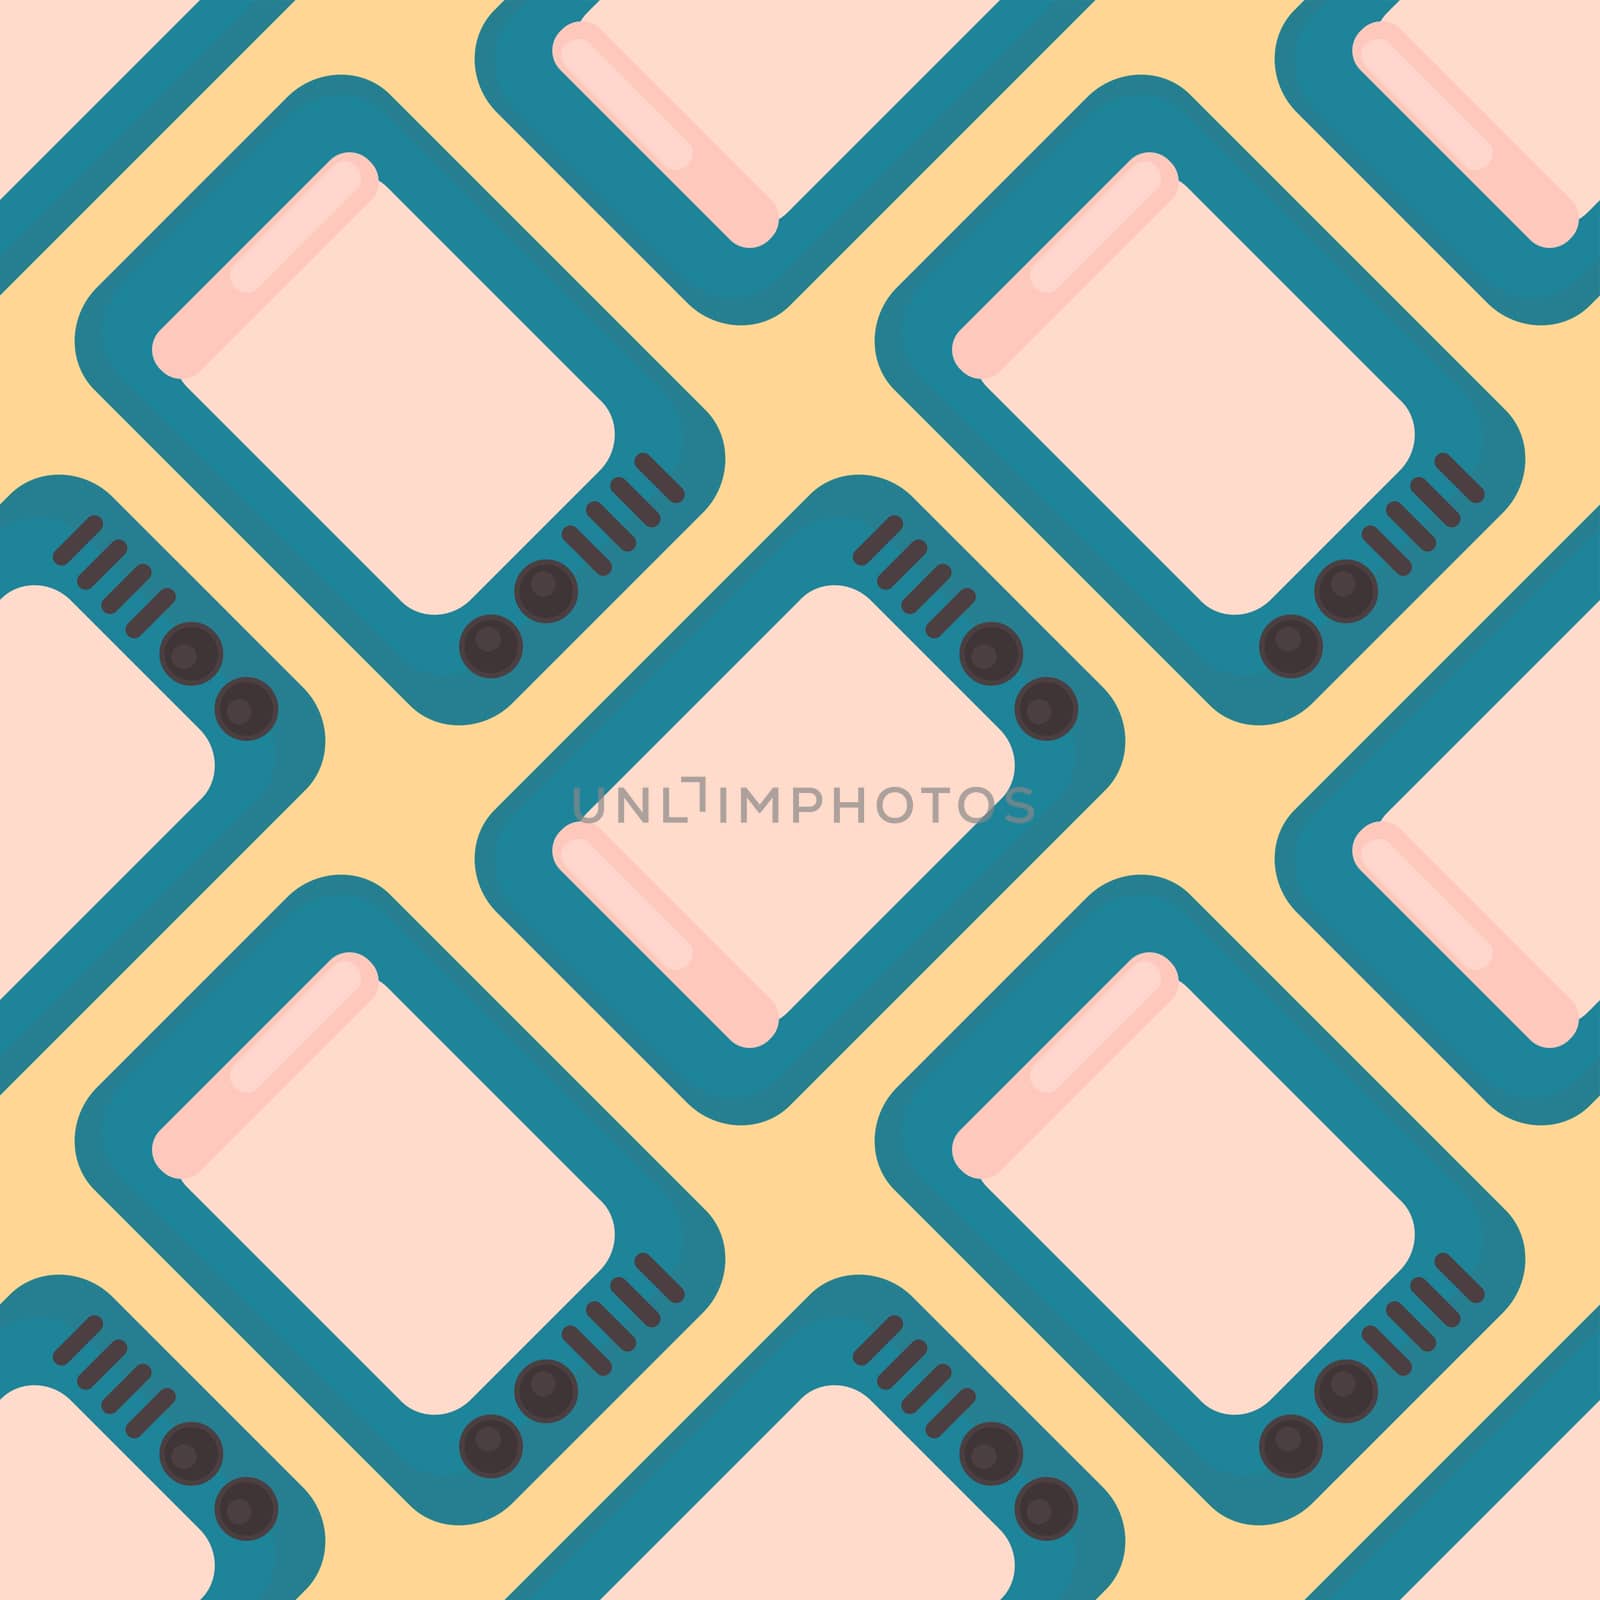 Microwaves pattern , illustration, vector on white background